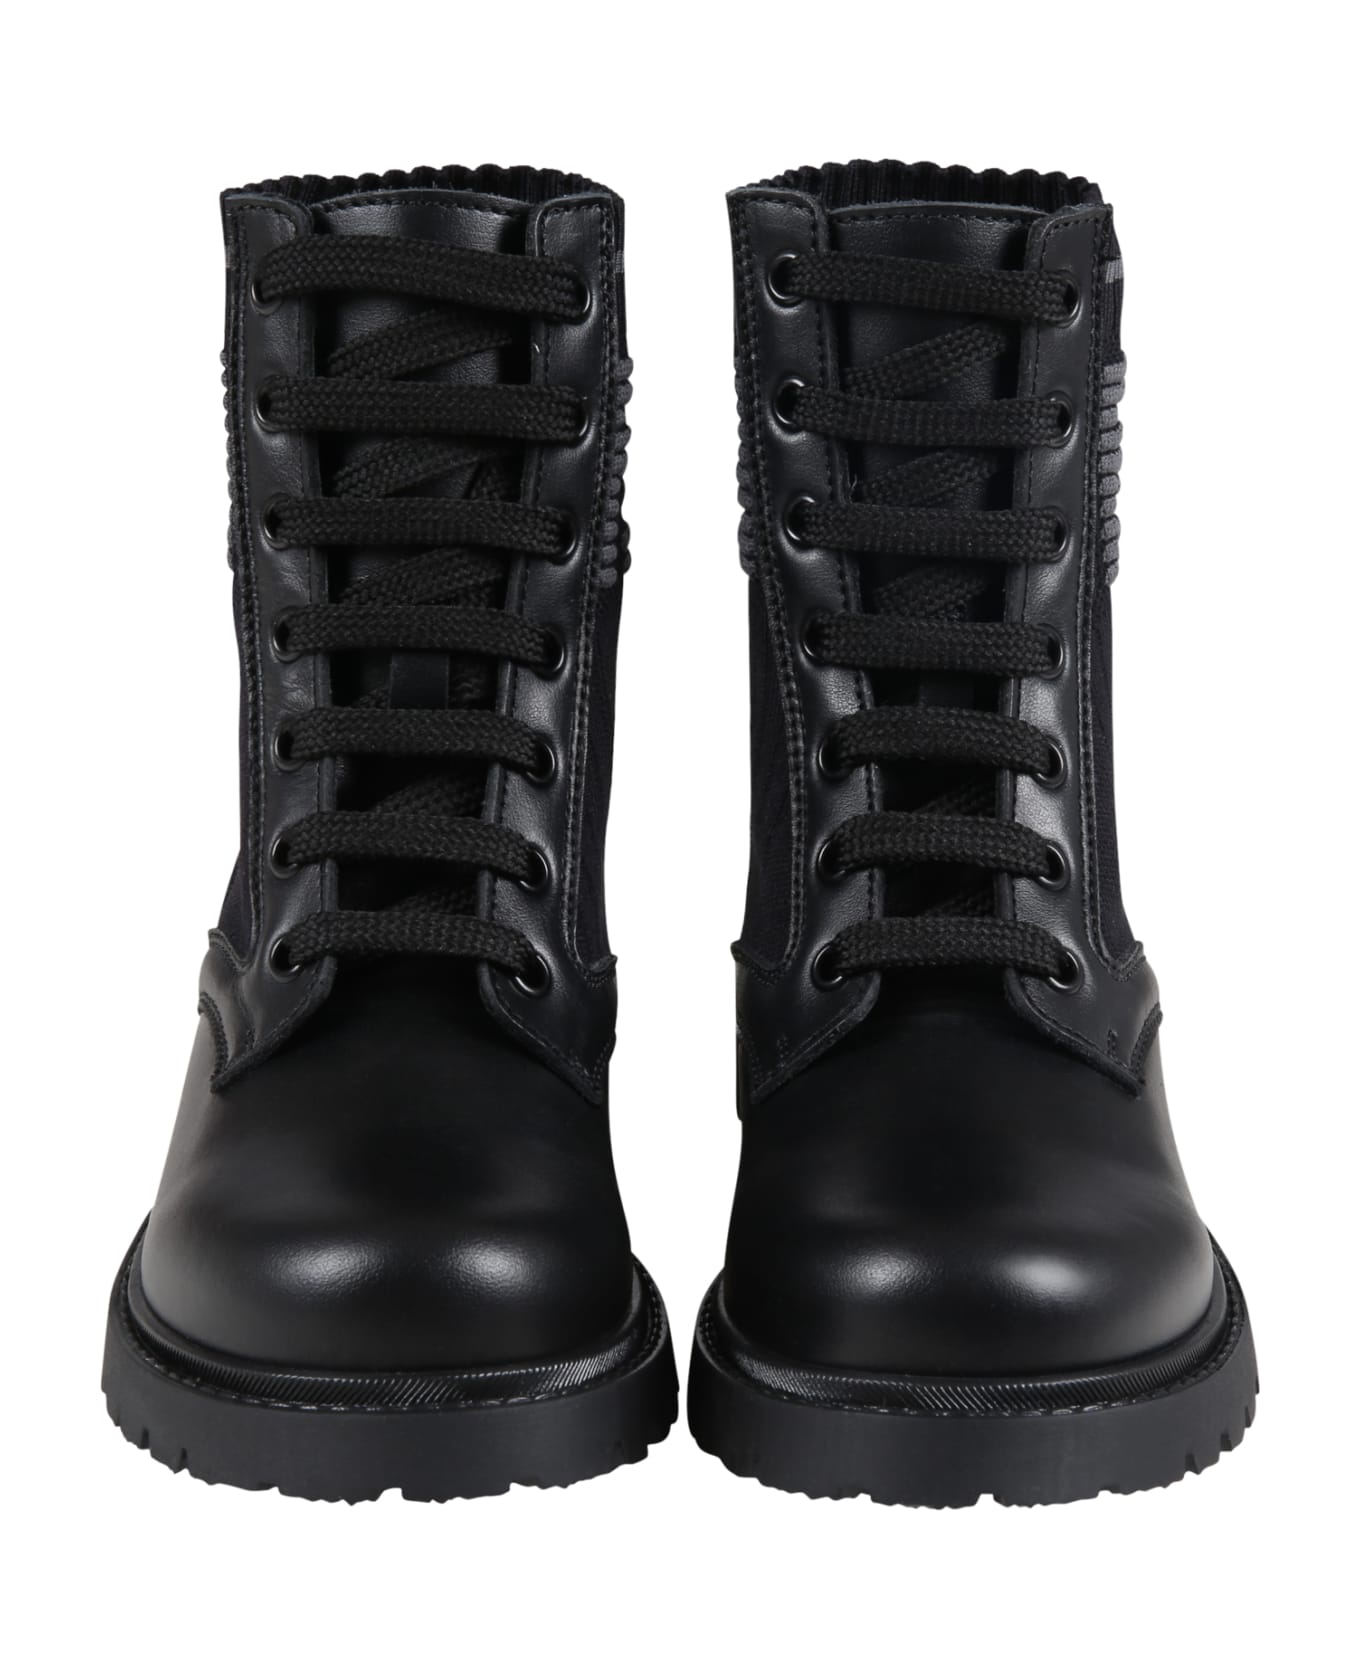 Fendi Black Boots For Kids With Double Gray Ff - Black シューズ